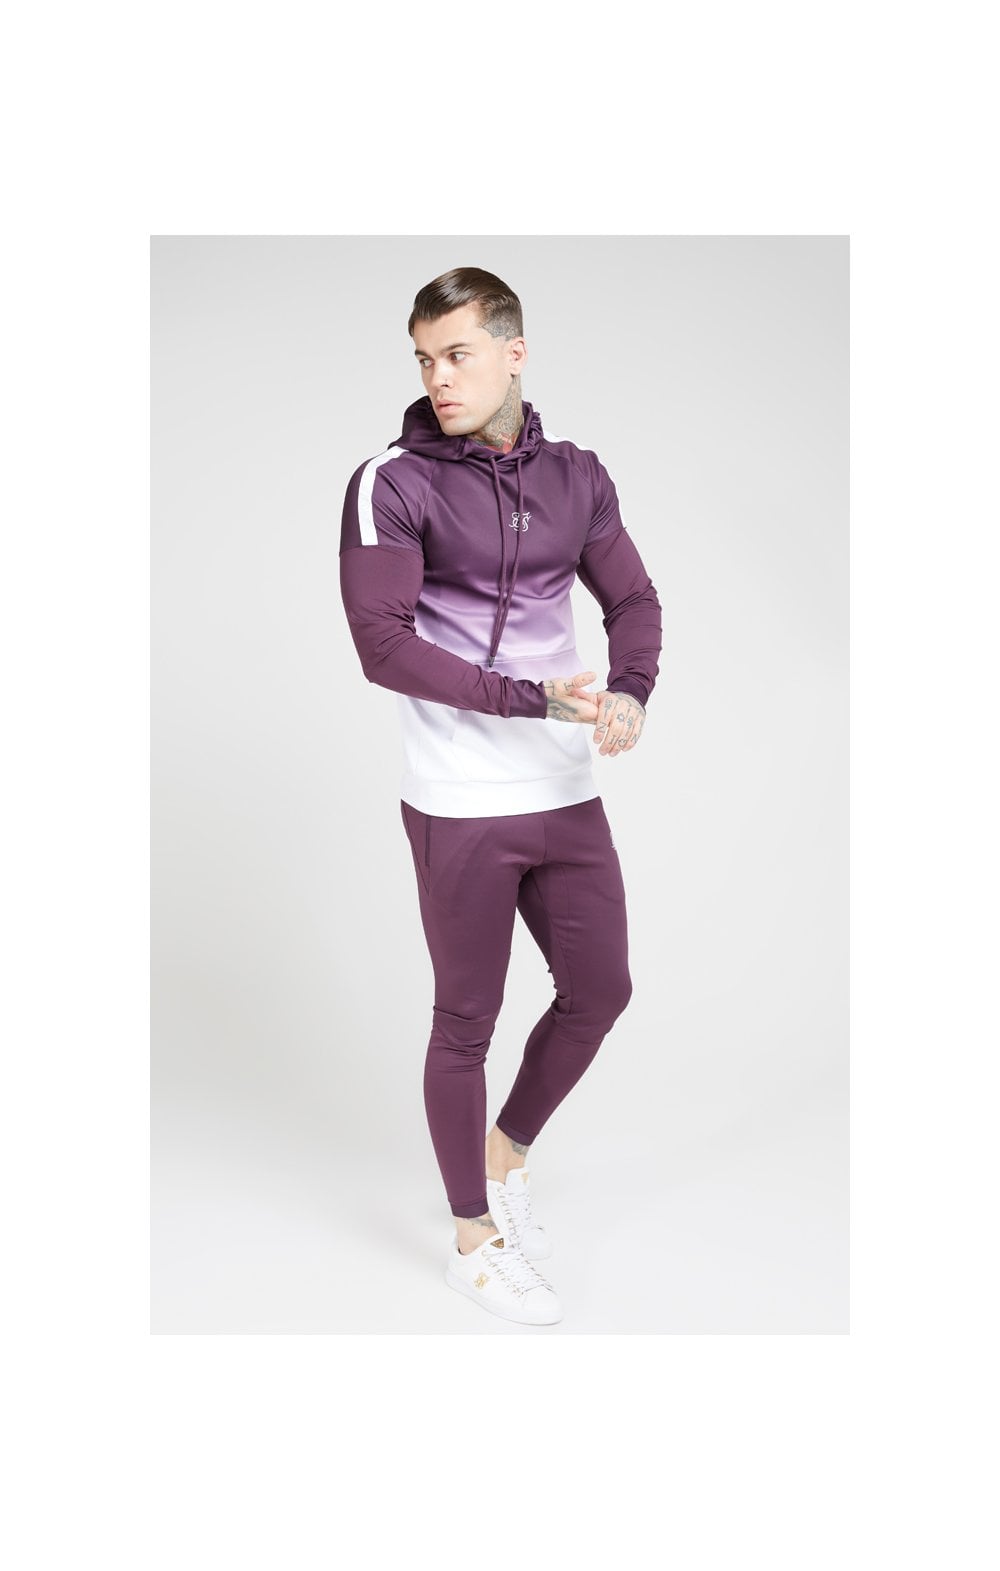 Load image into Gallery viewer, SikSilk Vapour Hybrid Sleeve Tape Hoodie - Rich Burgundy Fade (3)